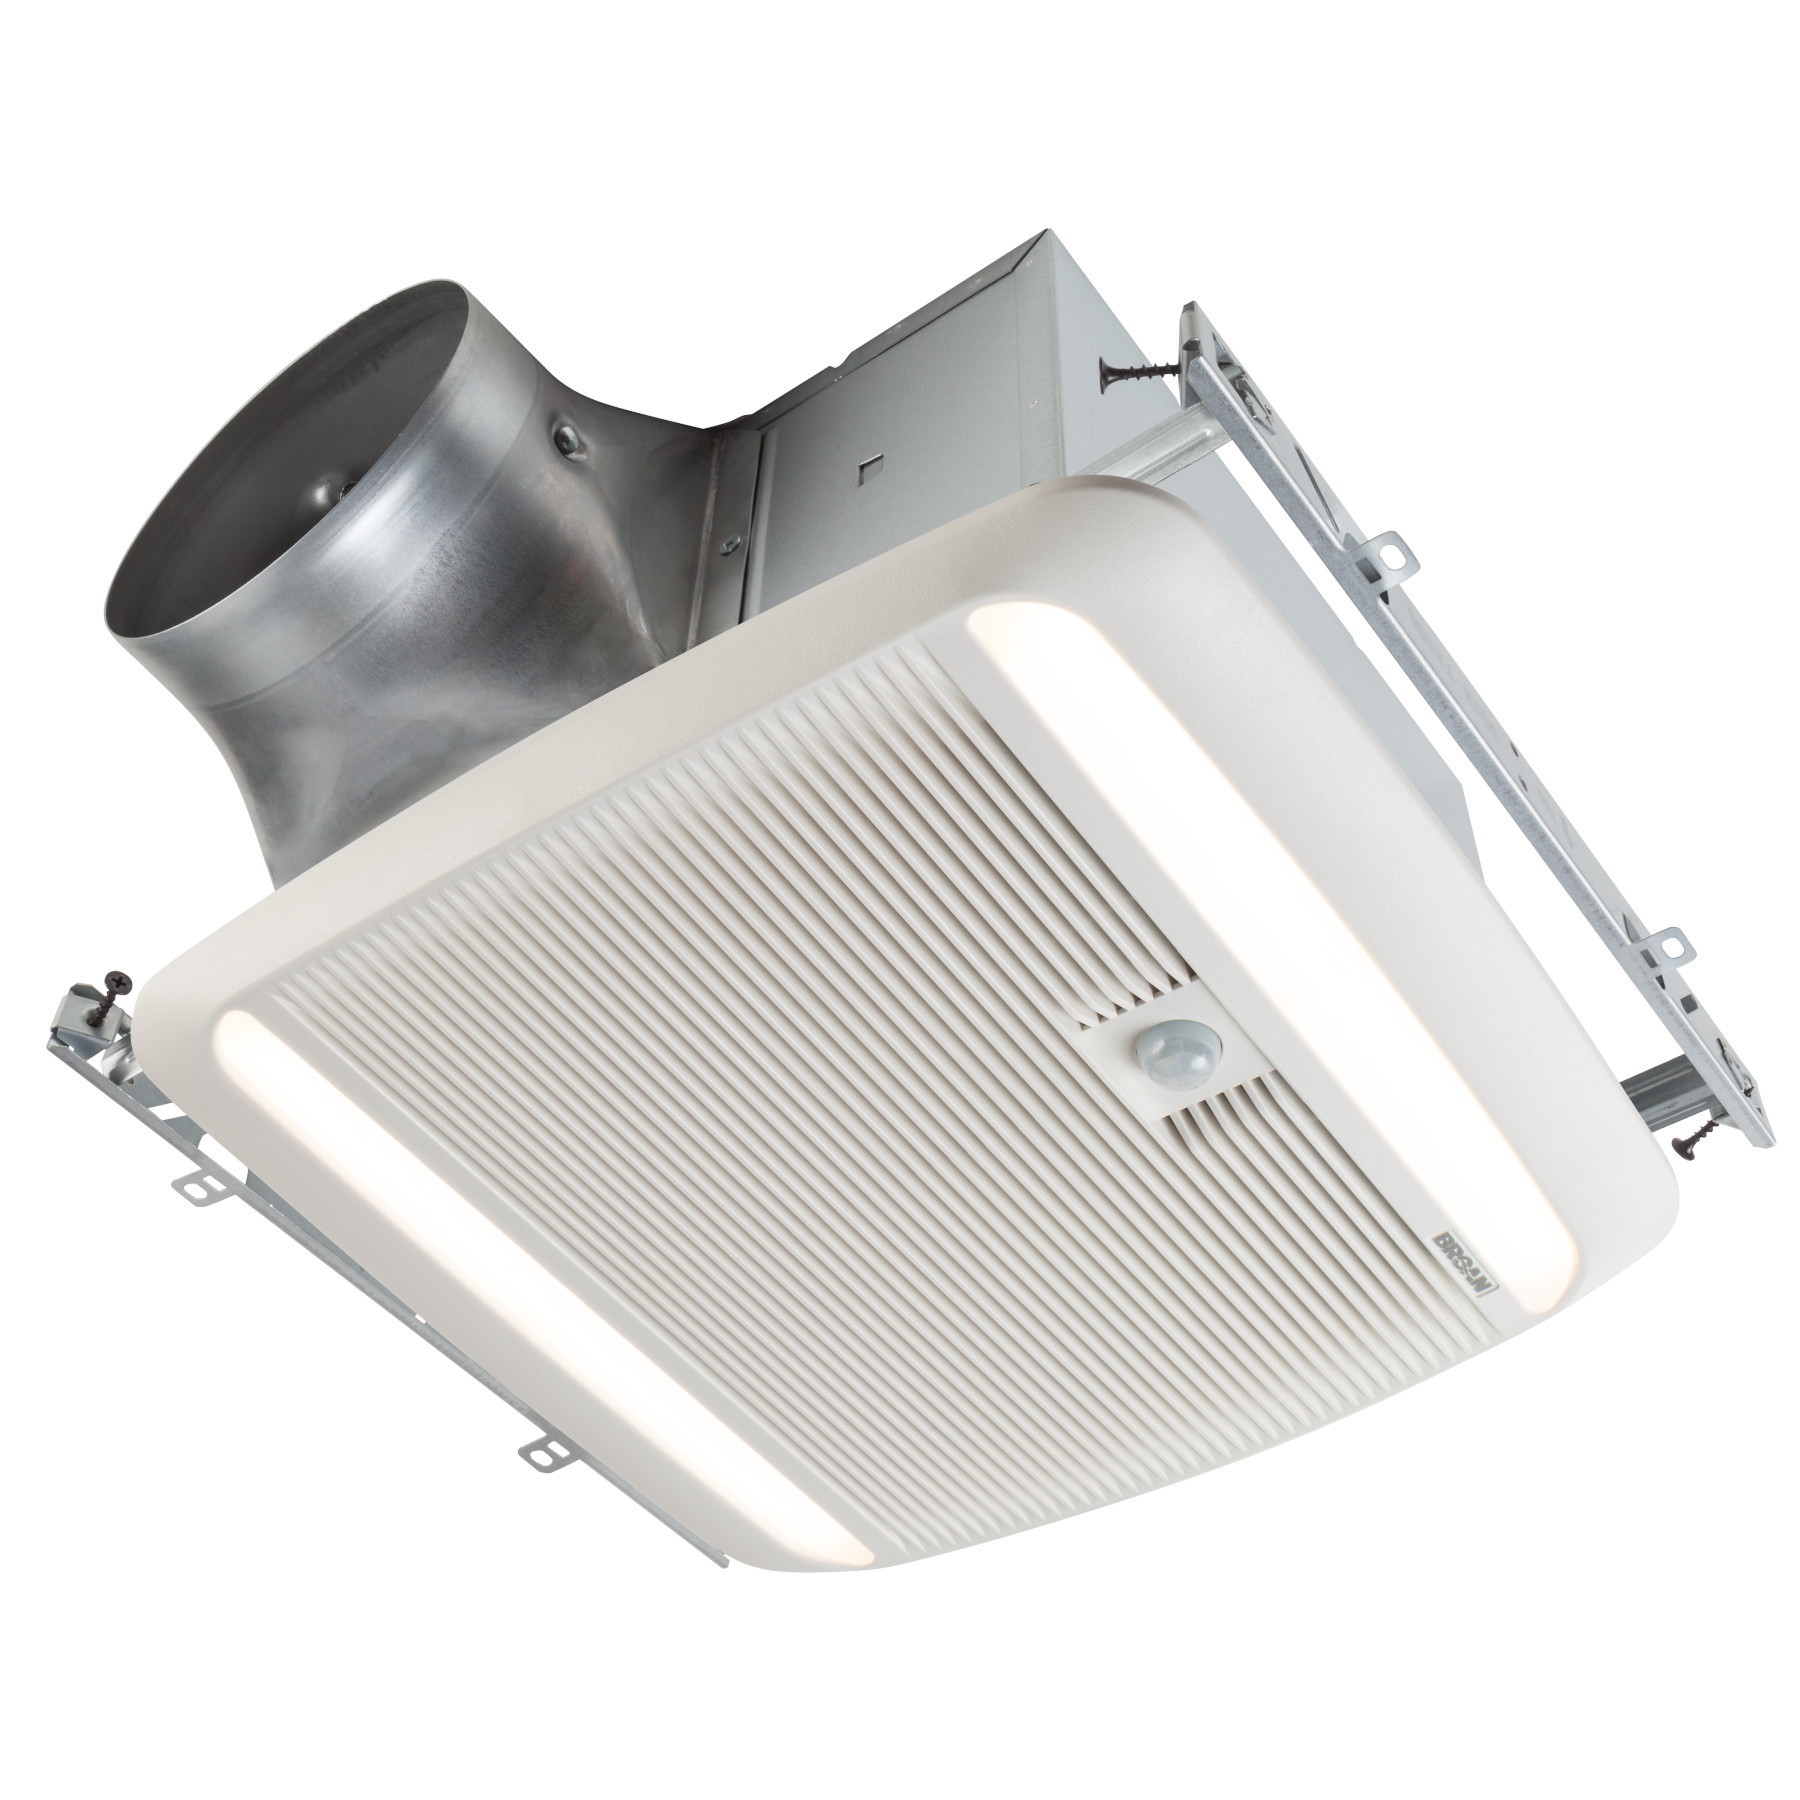 ULTRA GREEN ZB Series 80 CFM Multi-Speed Bathroom Exhaust Fan with LED Light and Motion Sensing, ENERGY STAR® certified